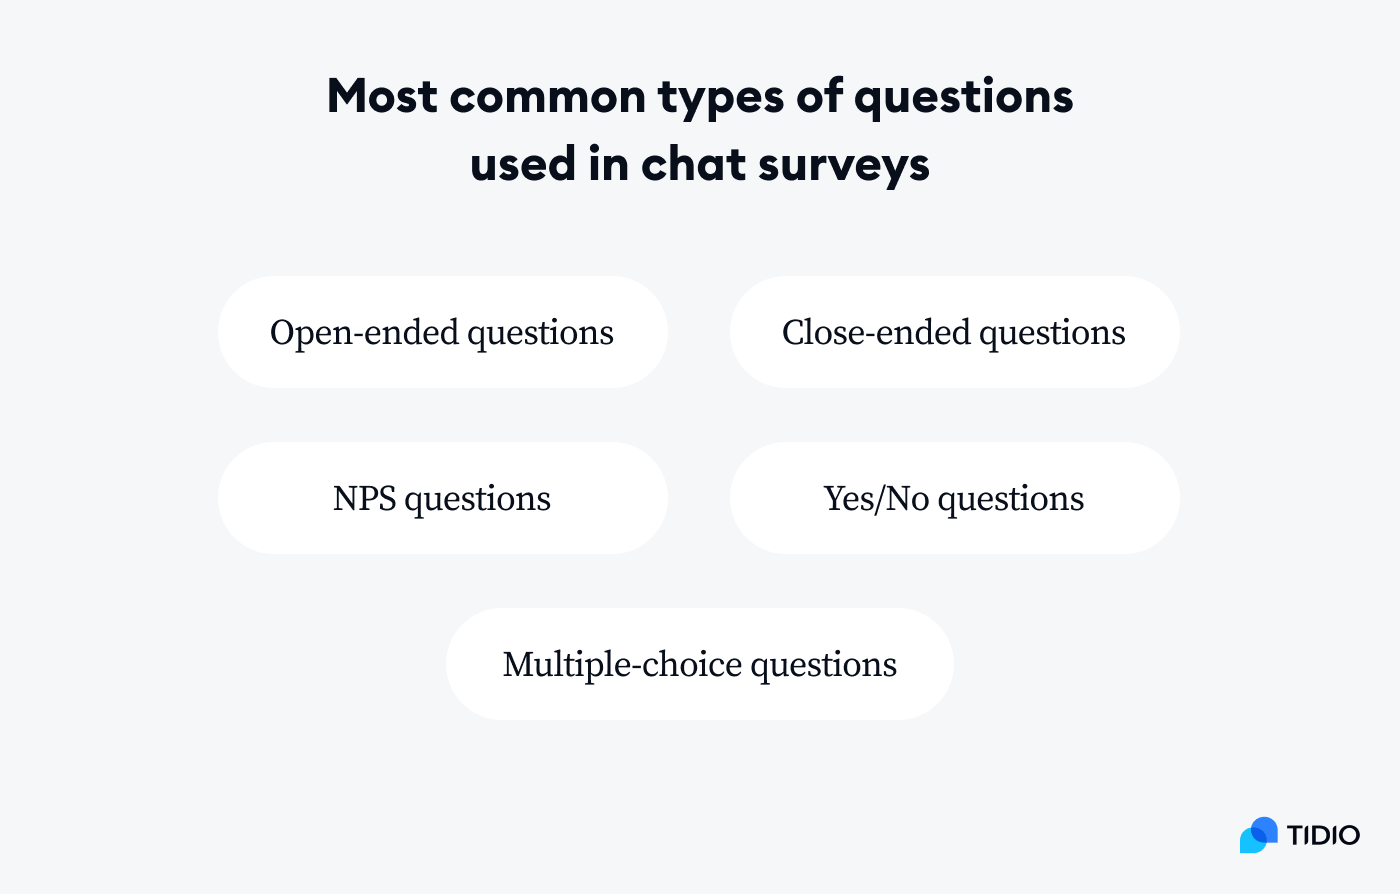 most common types of questionnaires on image